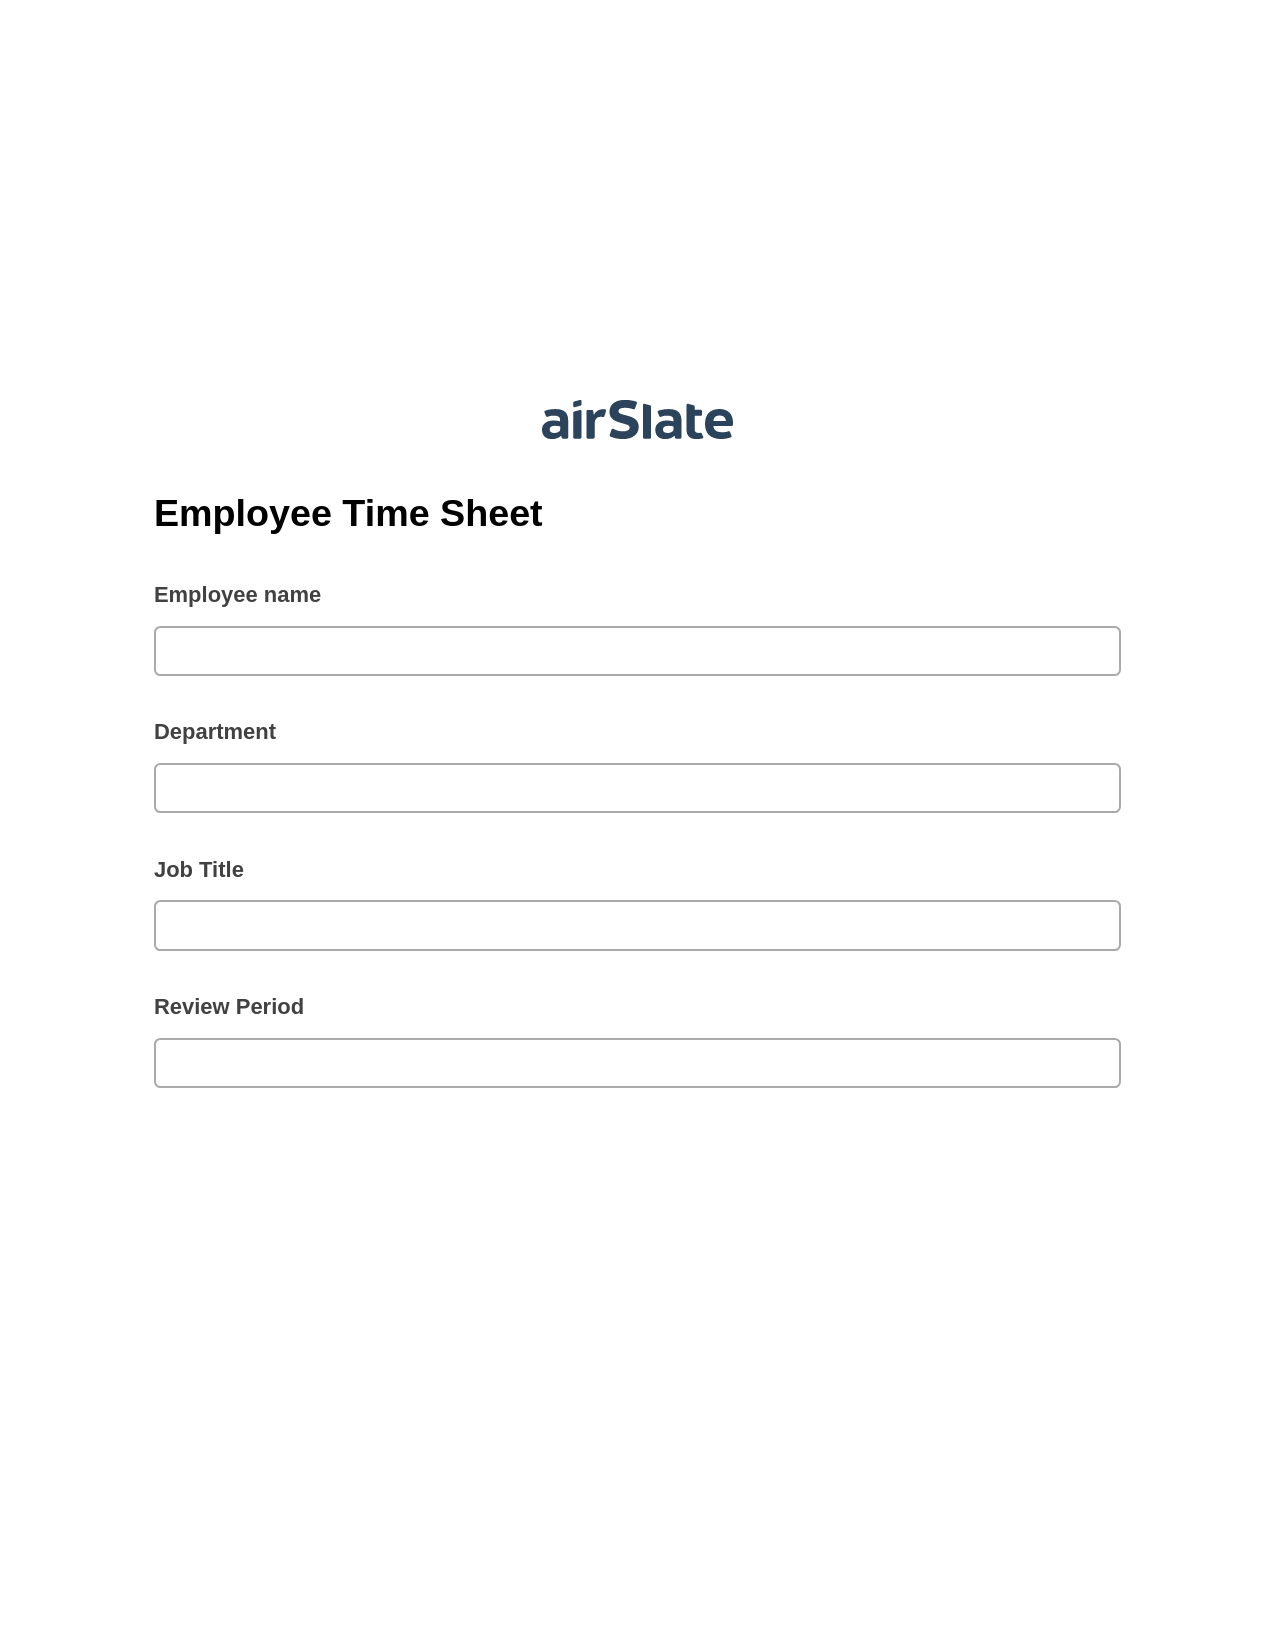 Employee Time Sheet Pre-fill from Salesforce Records Bot, Update Audit Trail Bot, Archive to OneDrive Bot